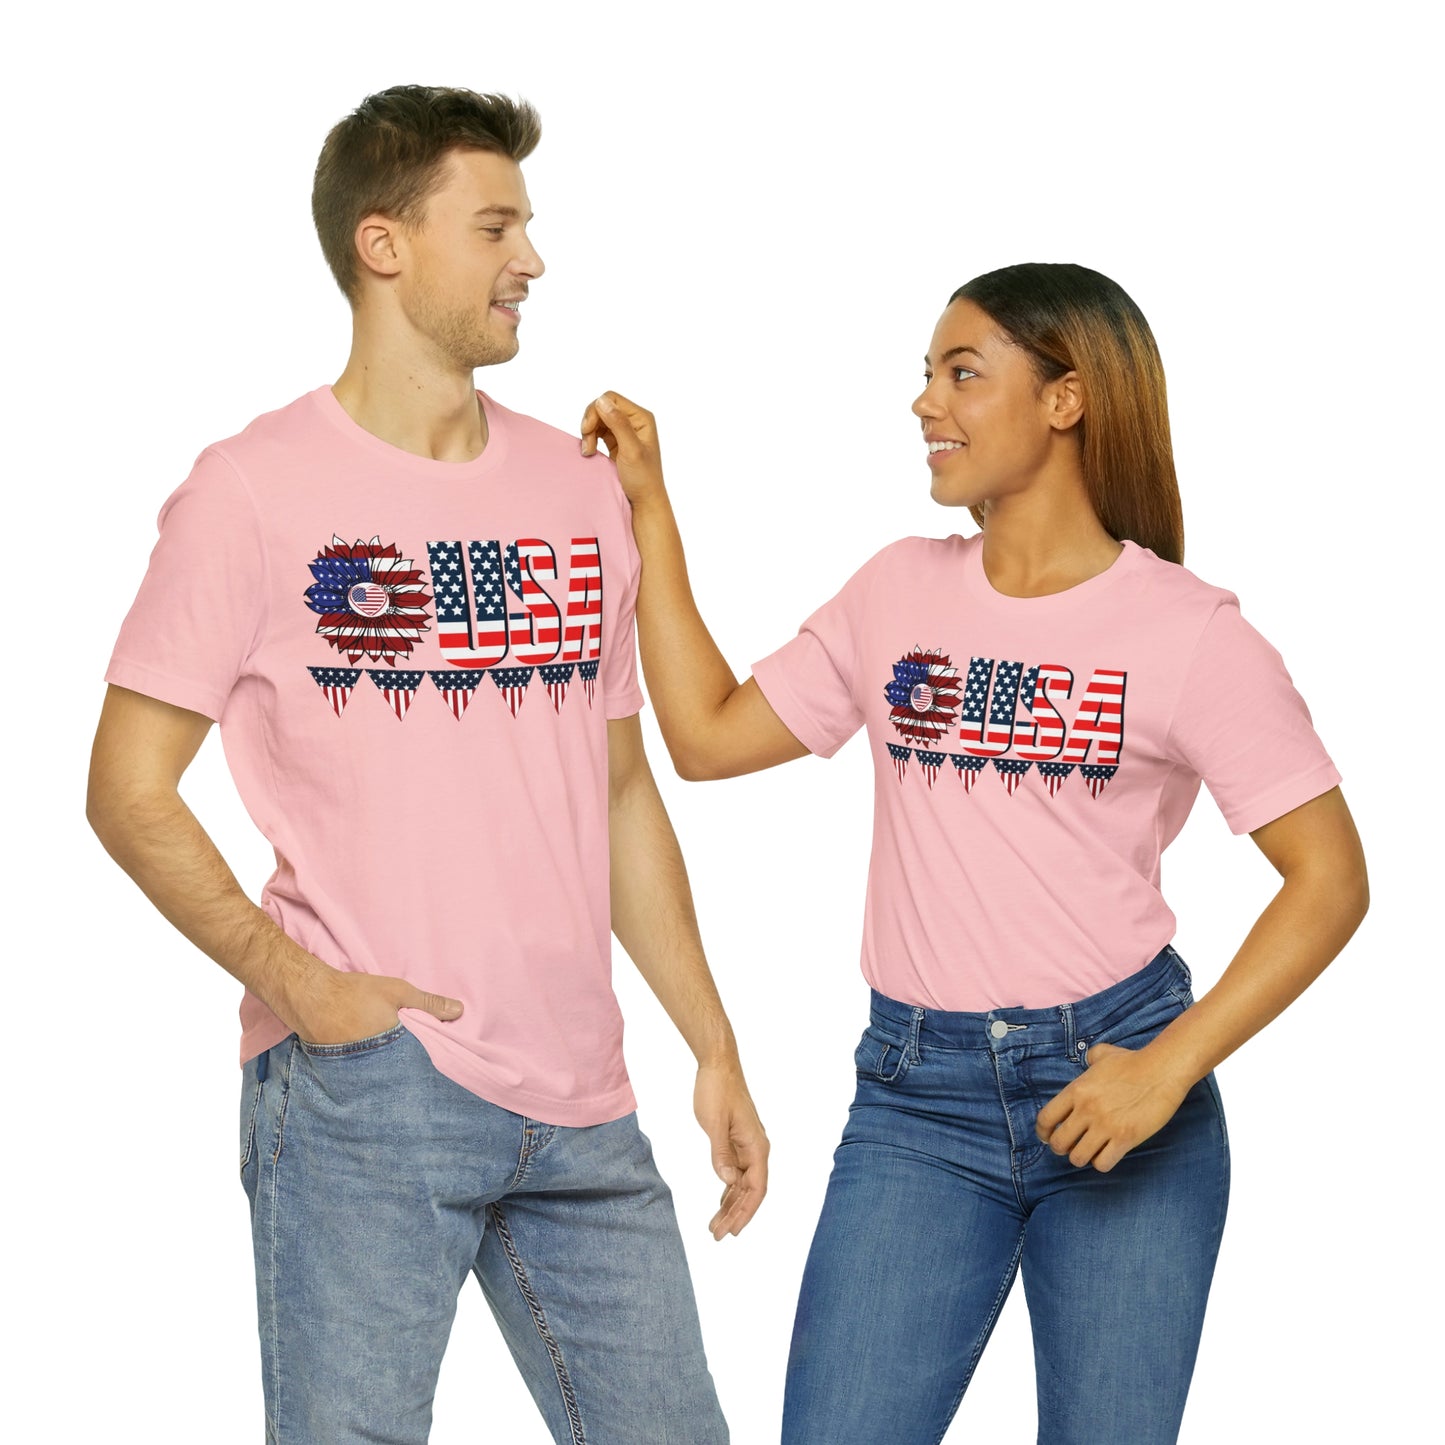 Flower USA American flag shirt, Red white and blue shirt, 4th of July shirt